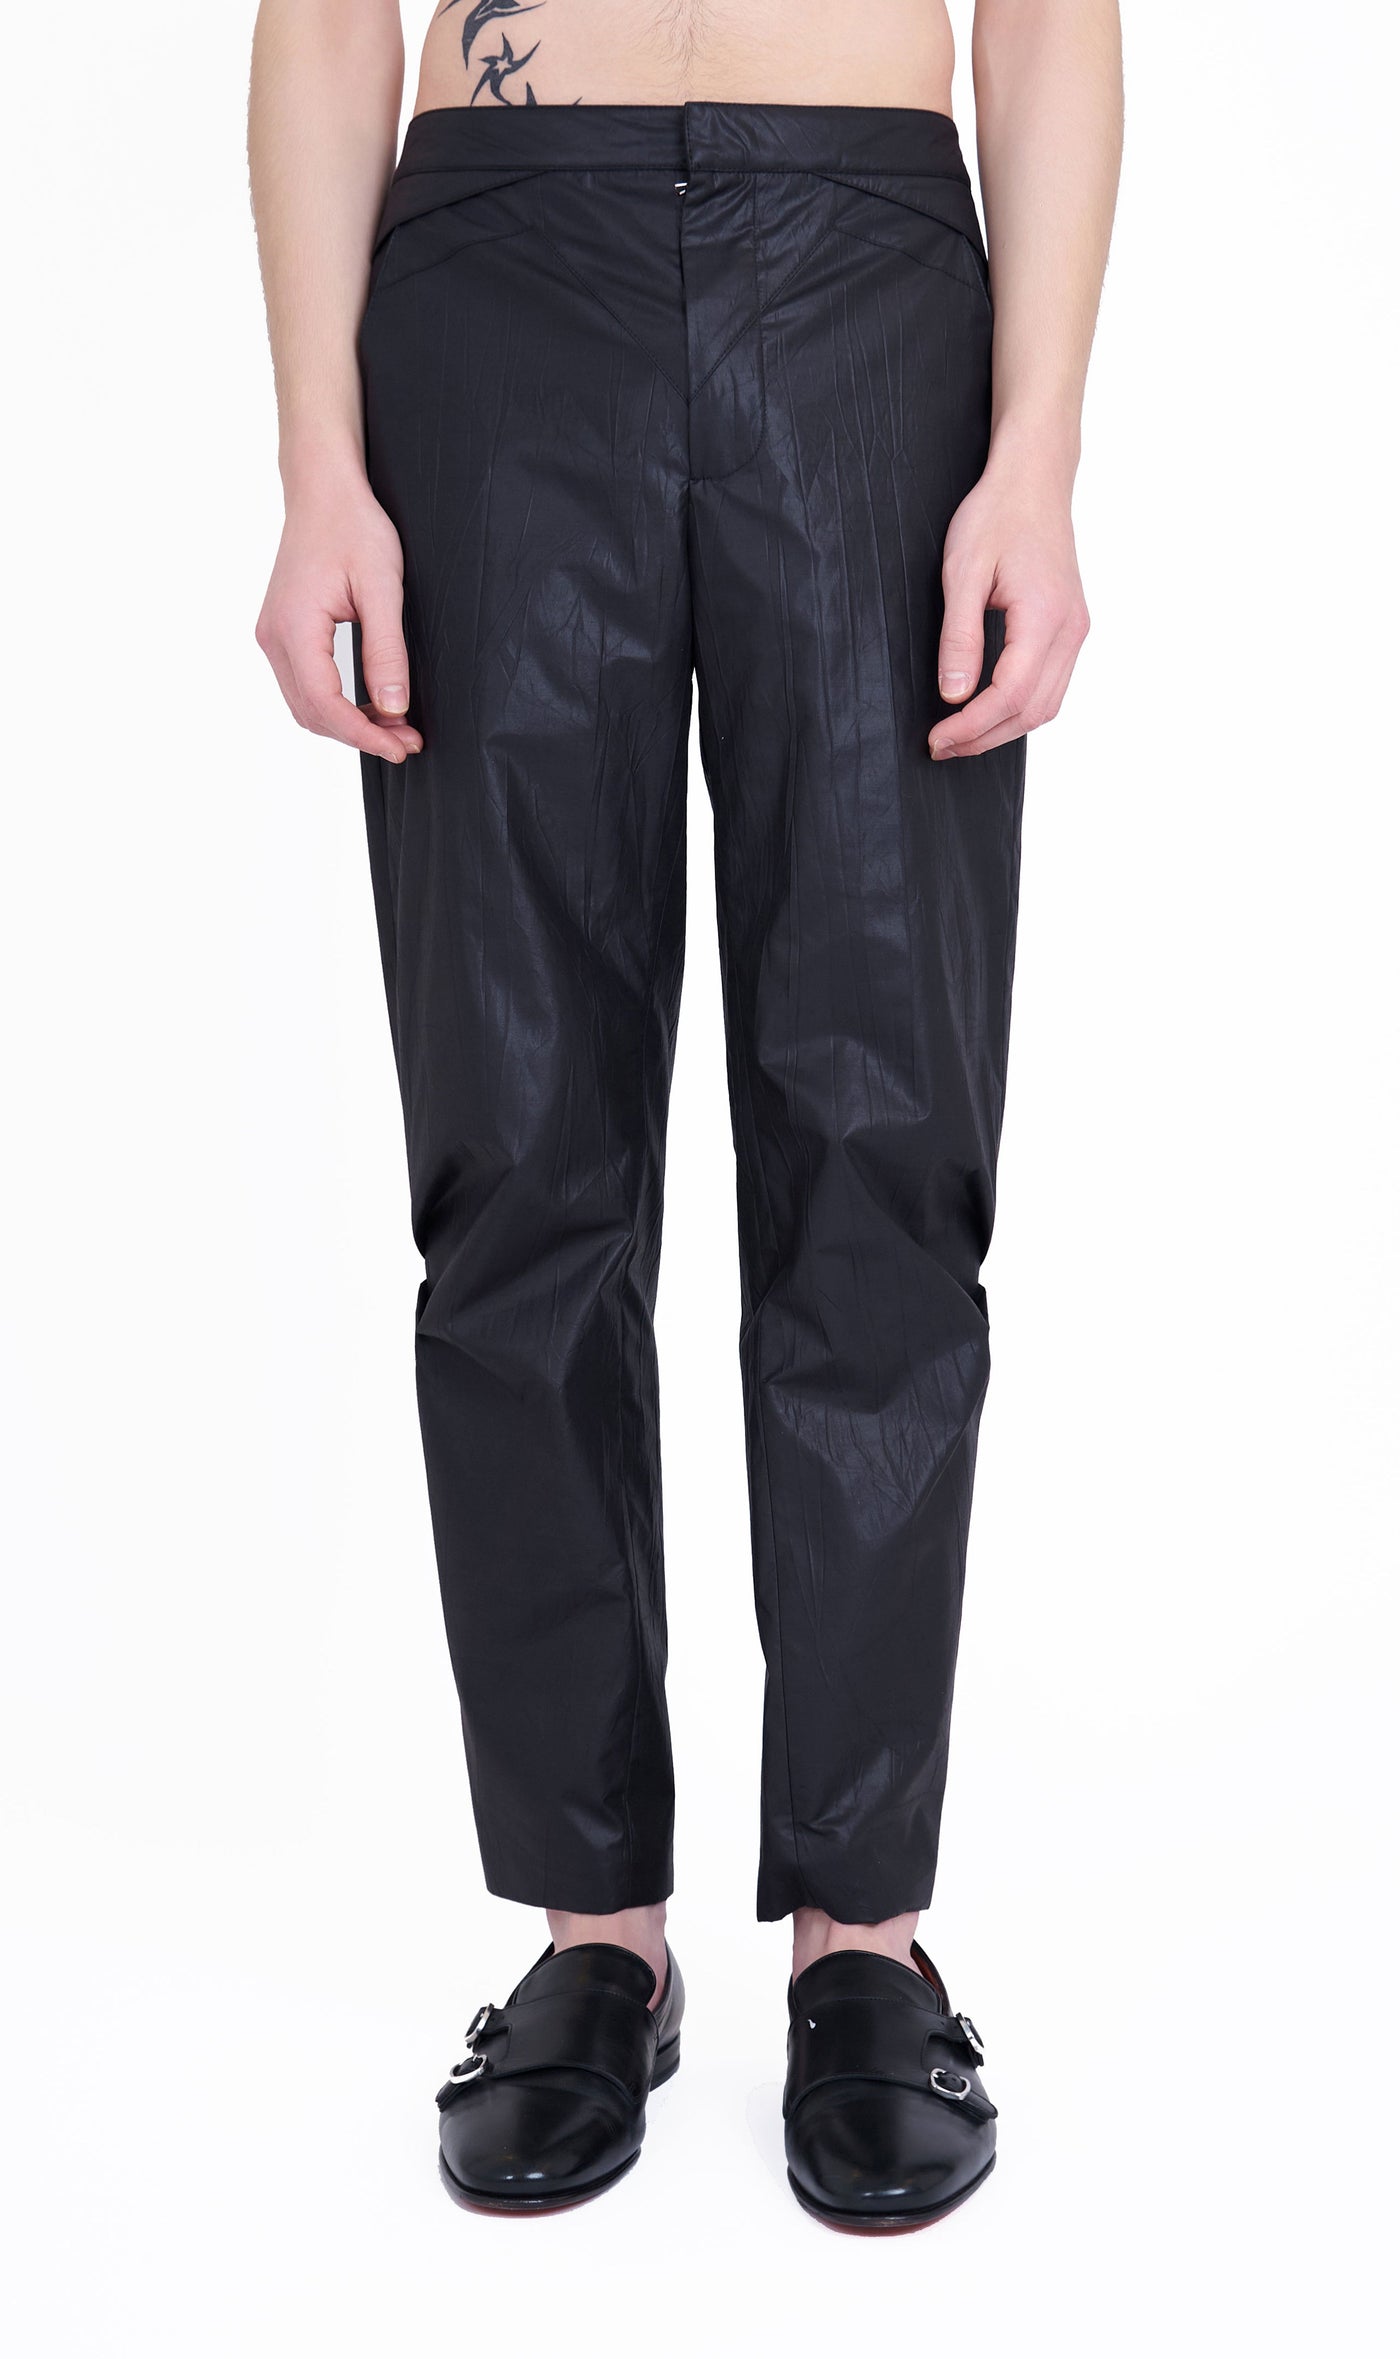 CLASH TAILORED TROUSERS / LIMITED EDITION